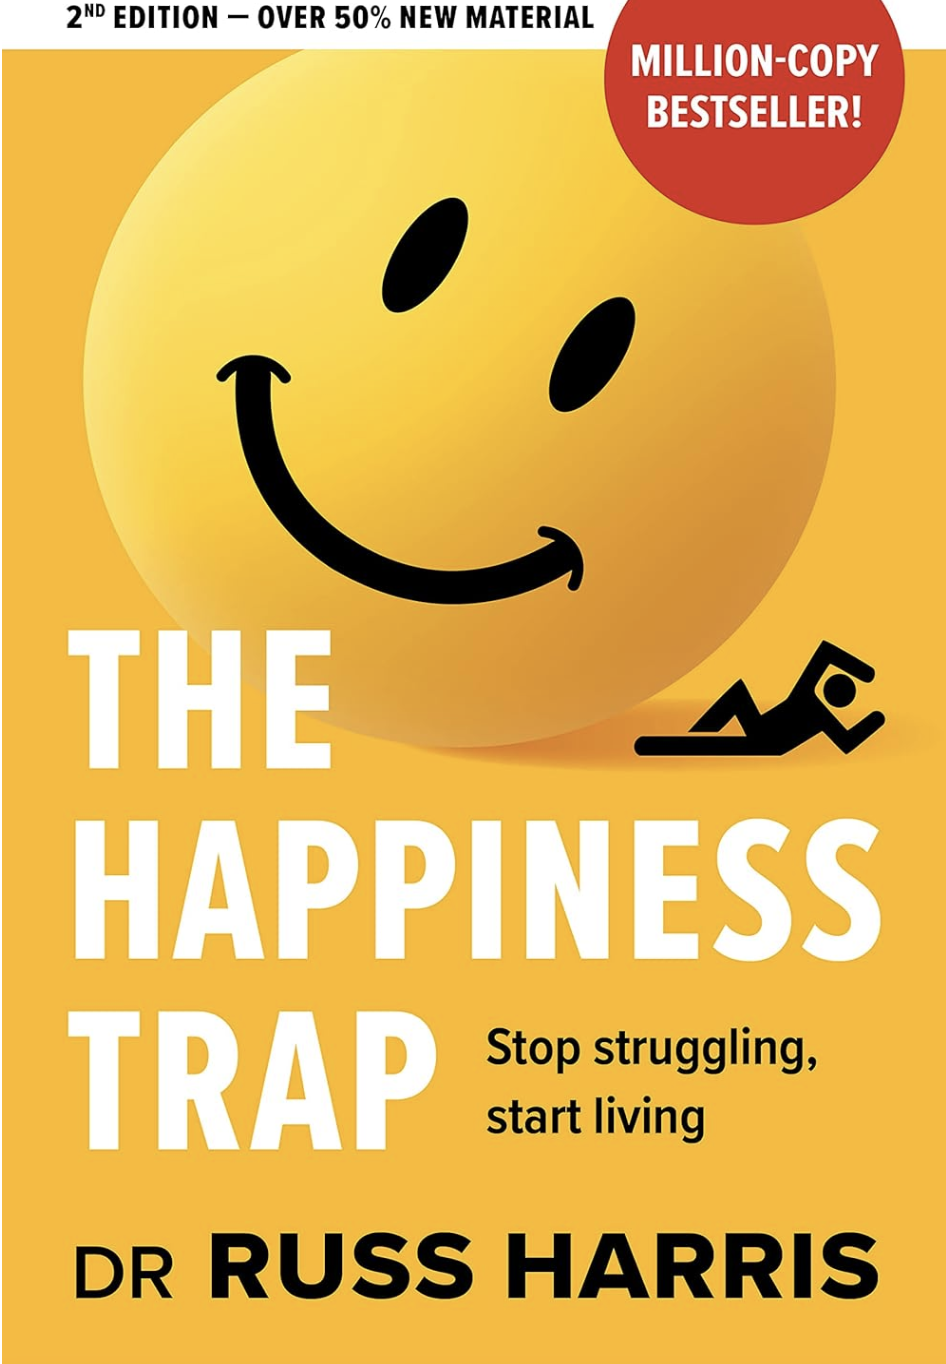 Book cover of "The Happiness Trap"